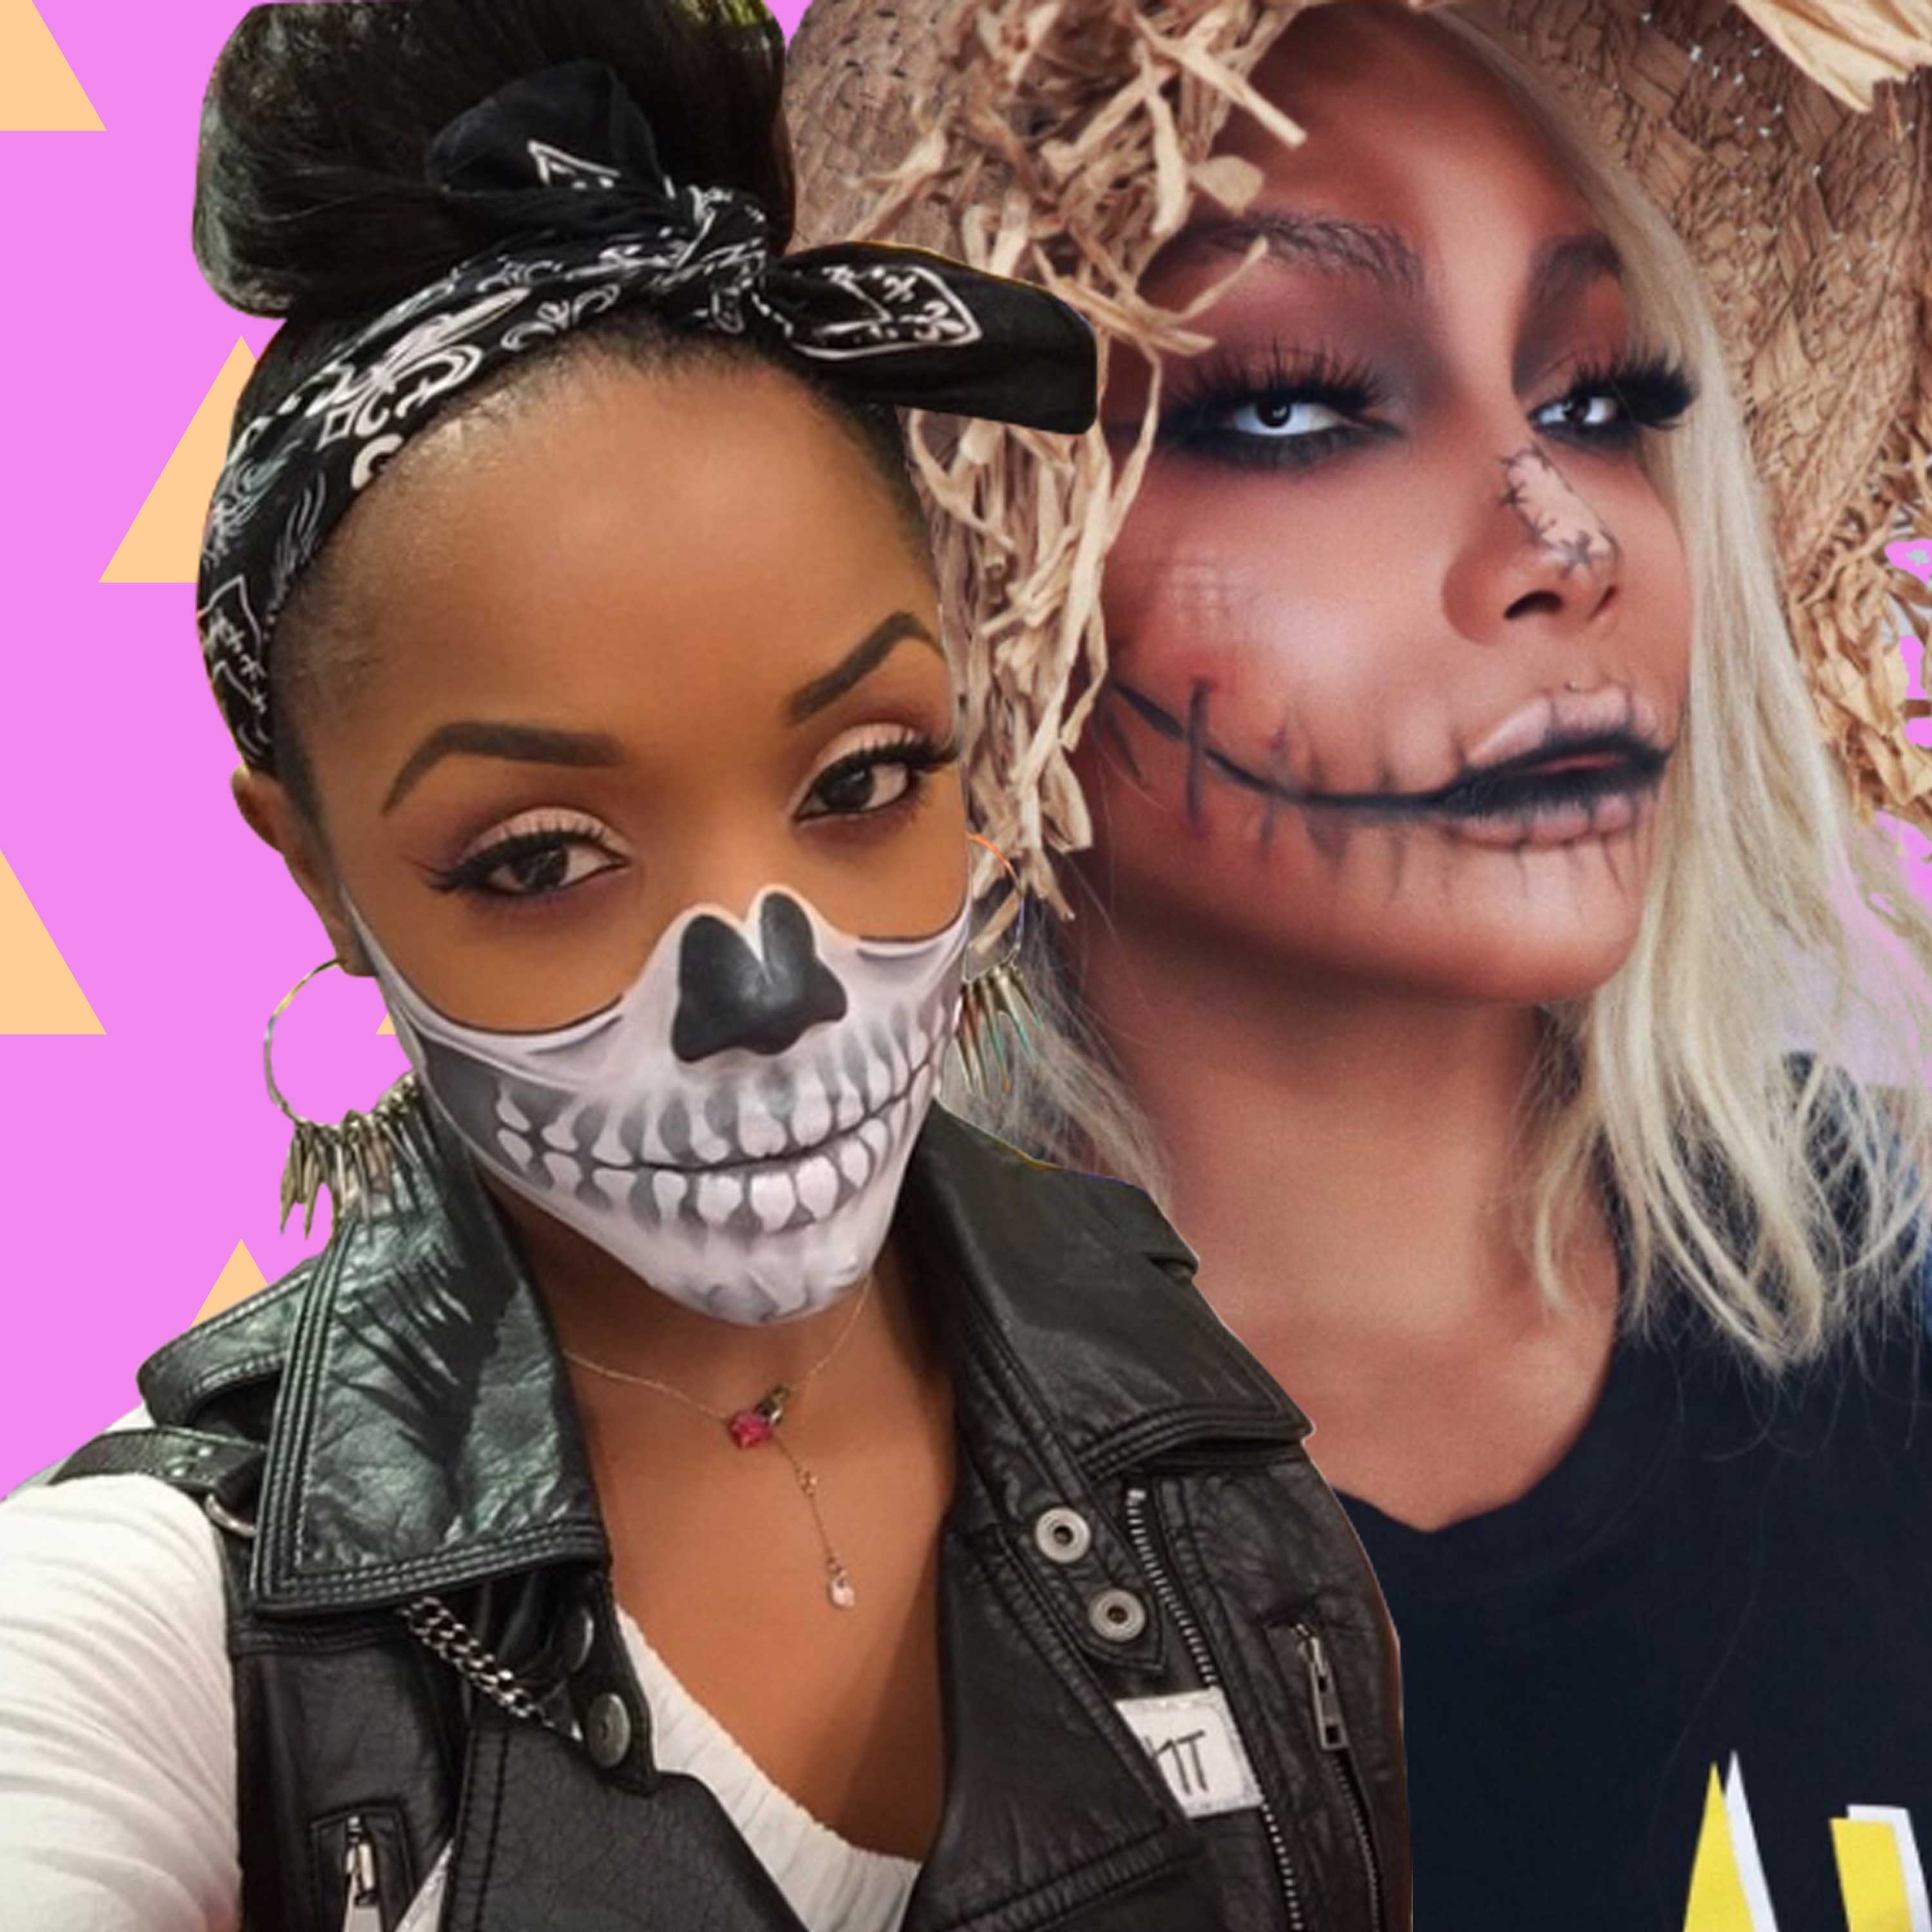 These Easy YouTube Halloween Makeup Tutorials Are a Must See
